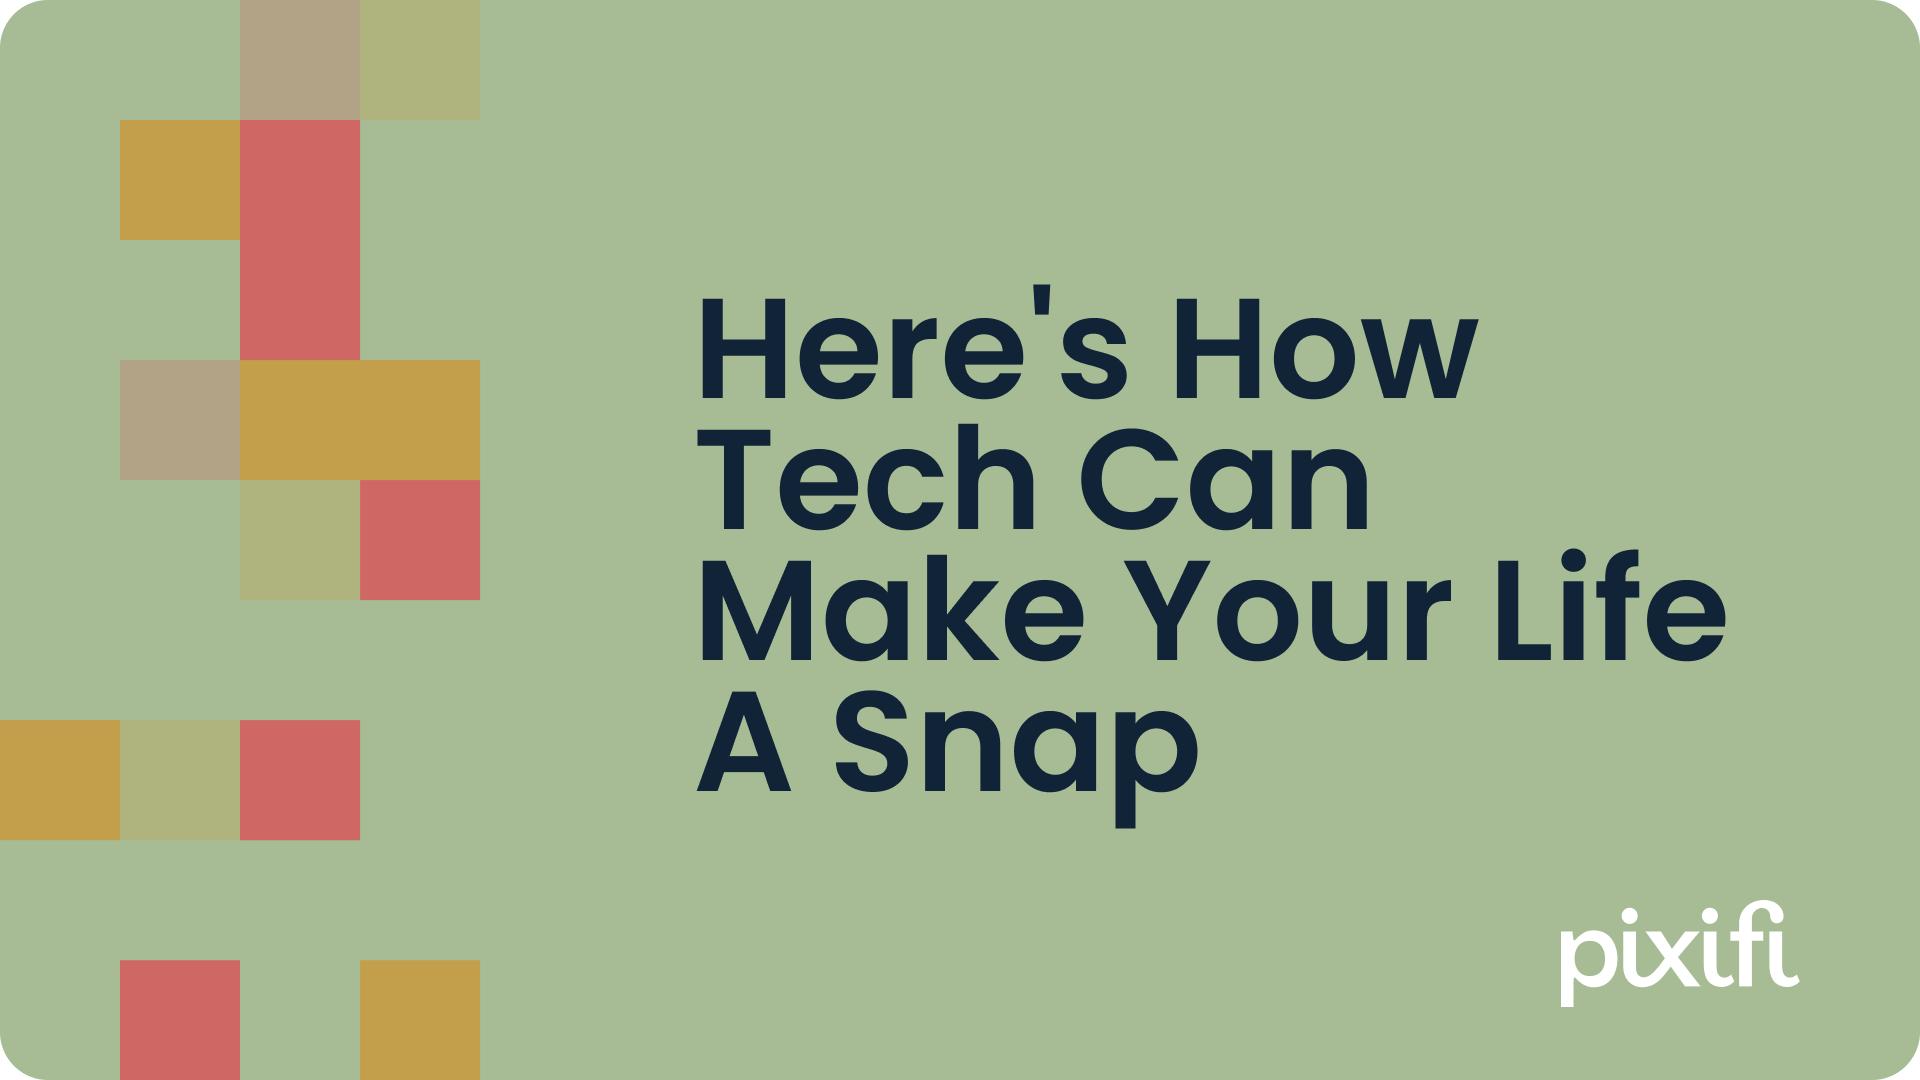 Here's How Tech Can Make Your Life A Snap